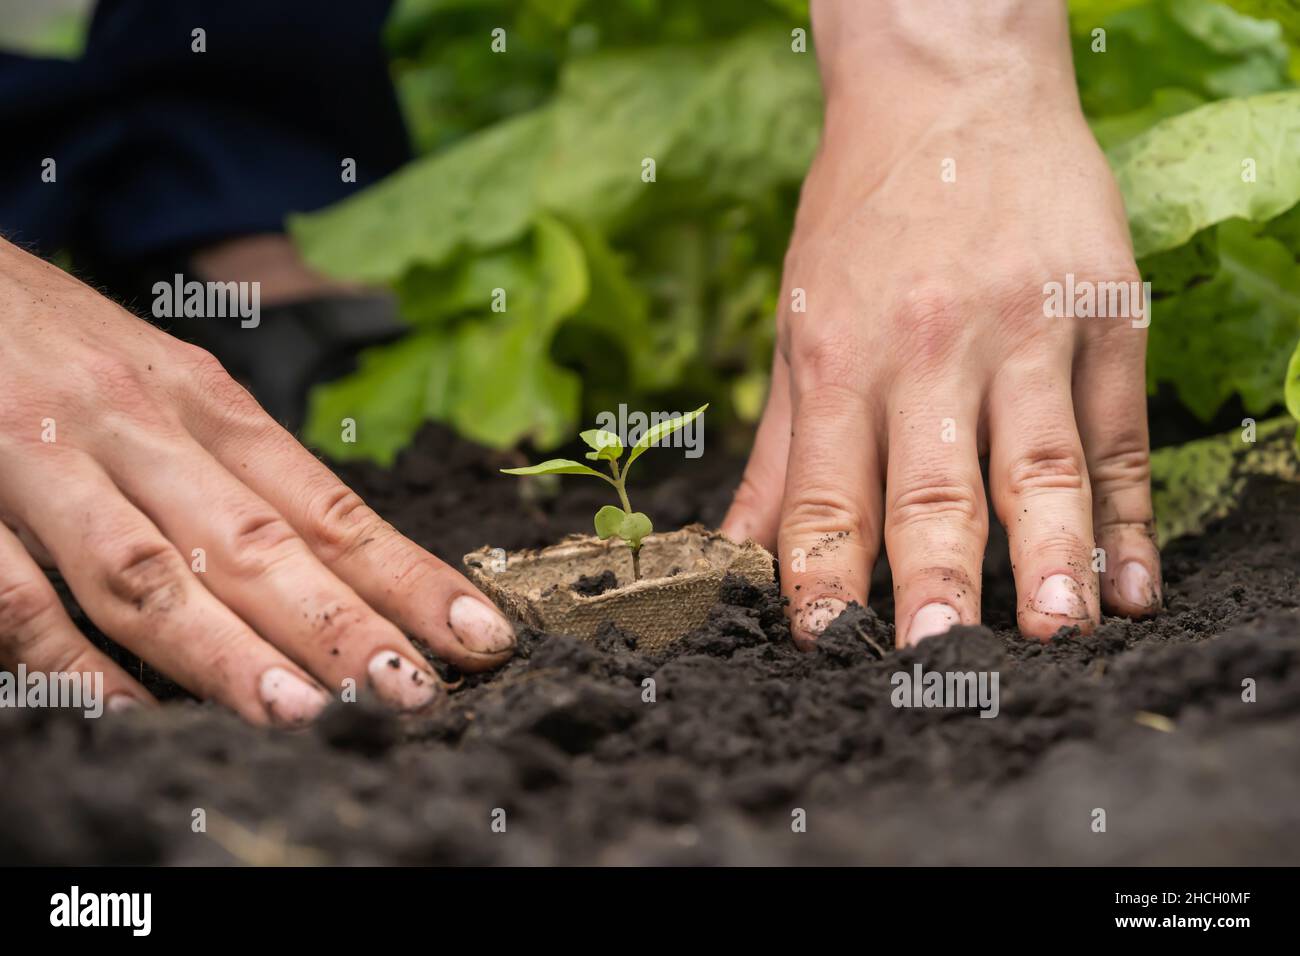 Small green plant seedling is growing in the soil Stock Photo